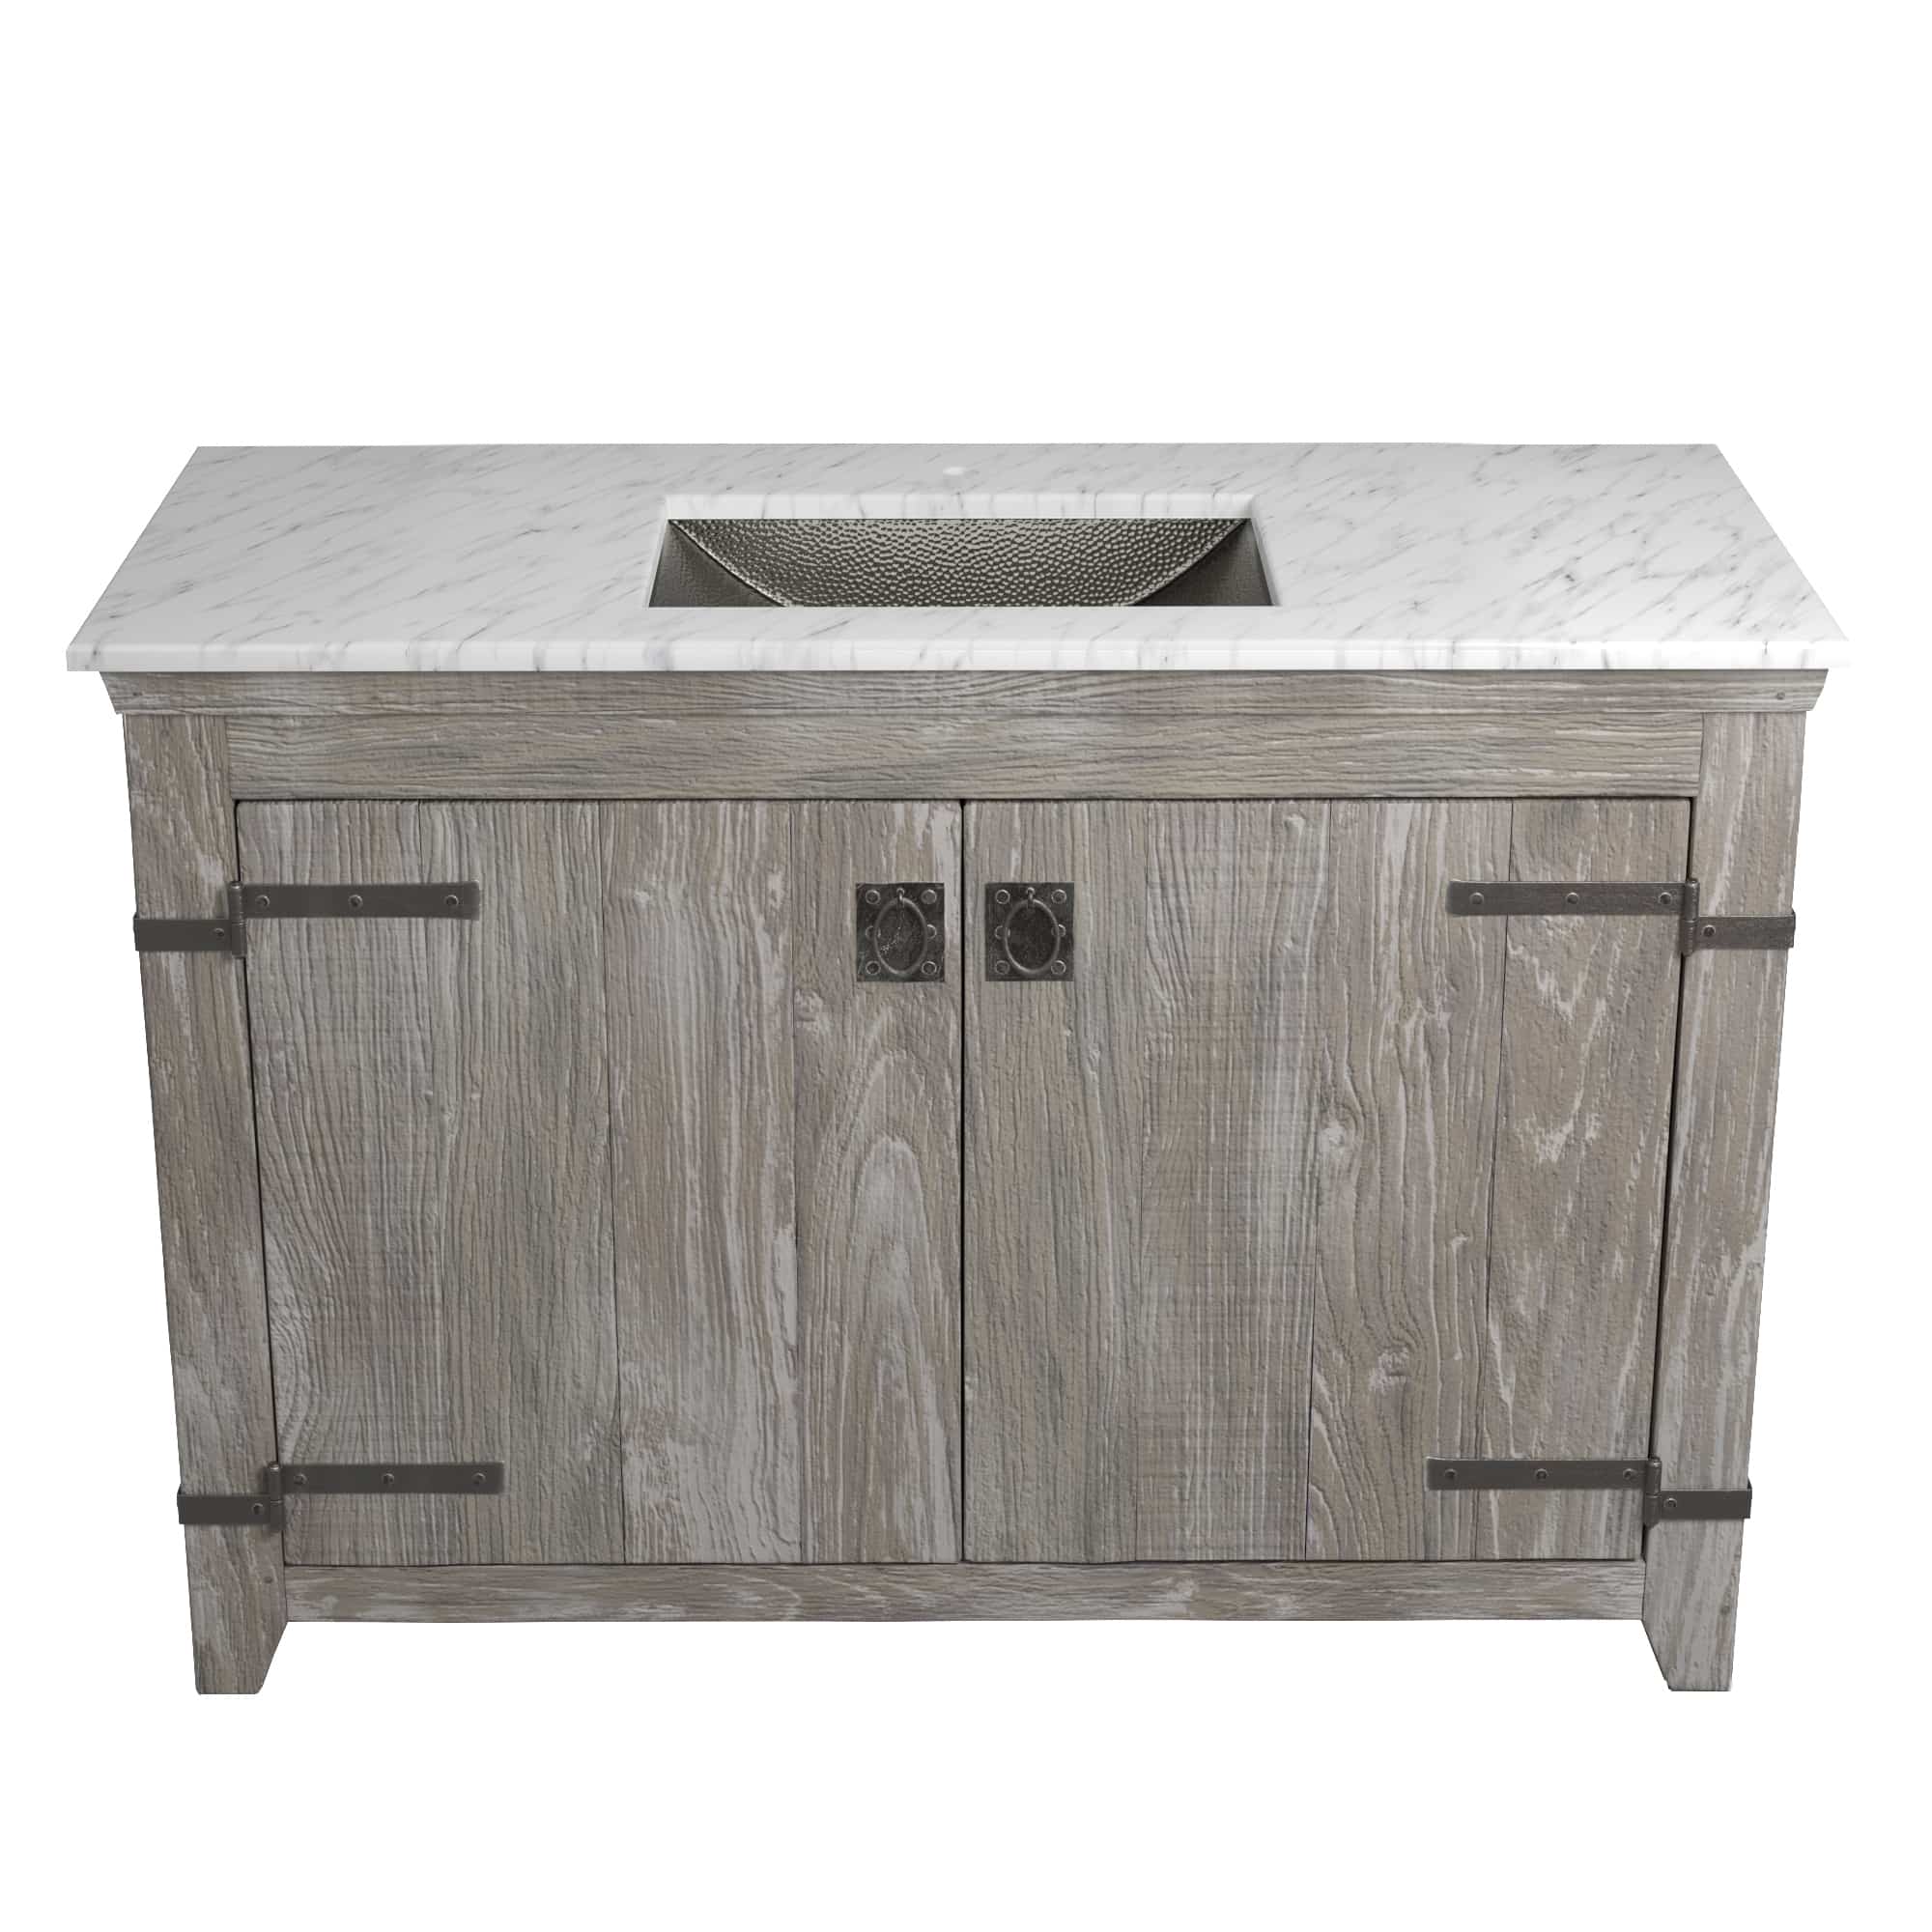 Native Trails 48" Americana Vanity in Driftwood with Carrara Marble Top and Avila in Polished Nickel, Single Faucet Hole, BND48-VB-CT-CP-031